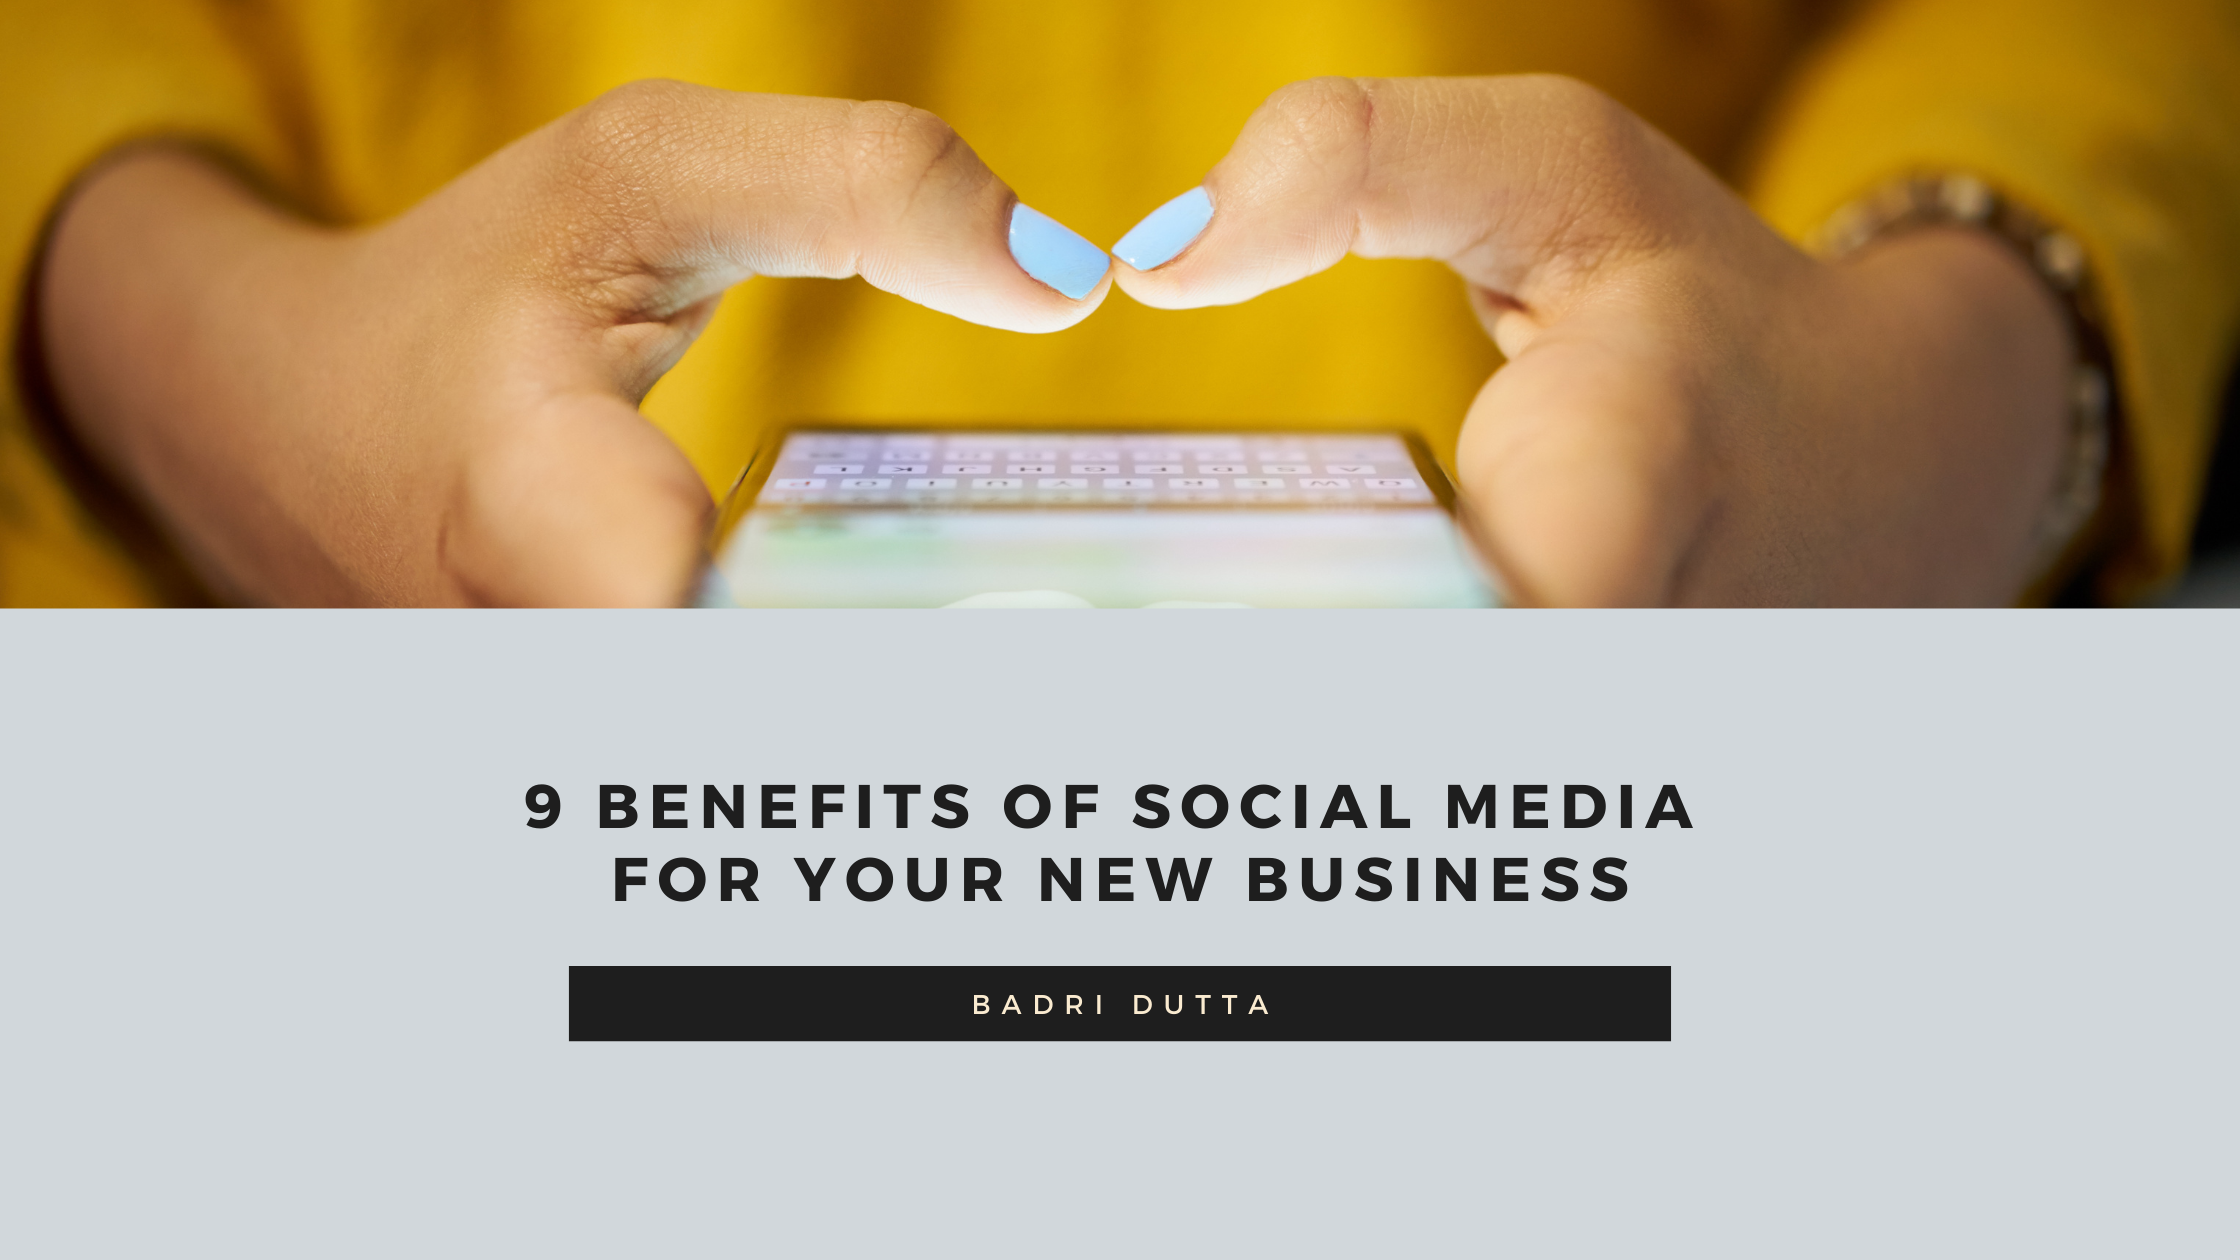 9 Benefits of Social Media for Your New Business